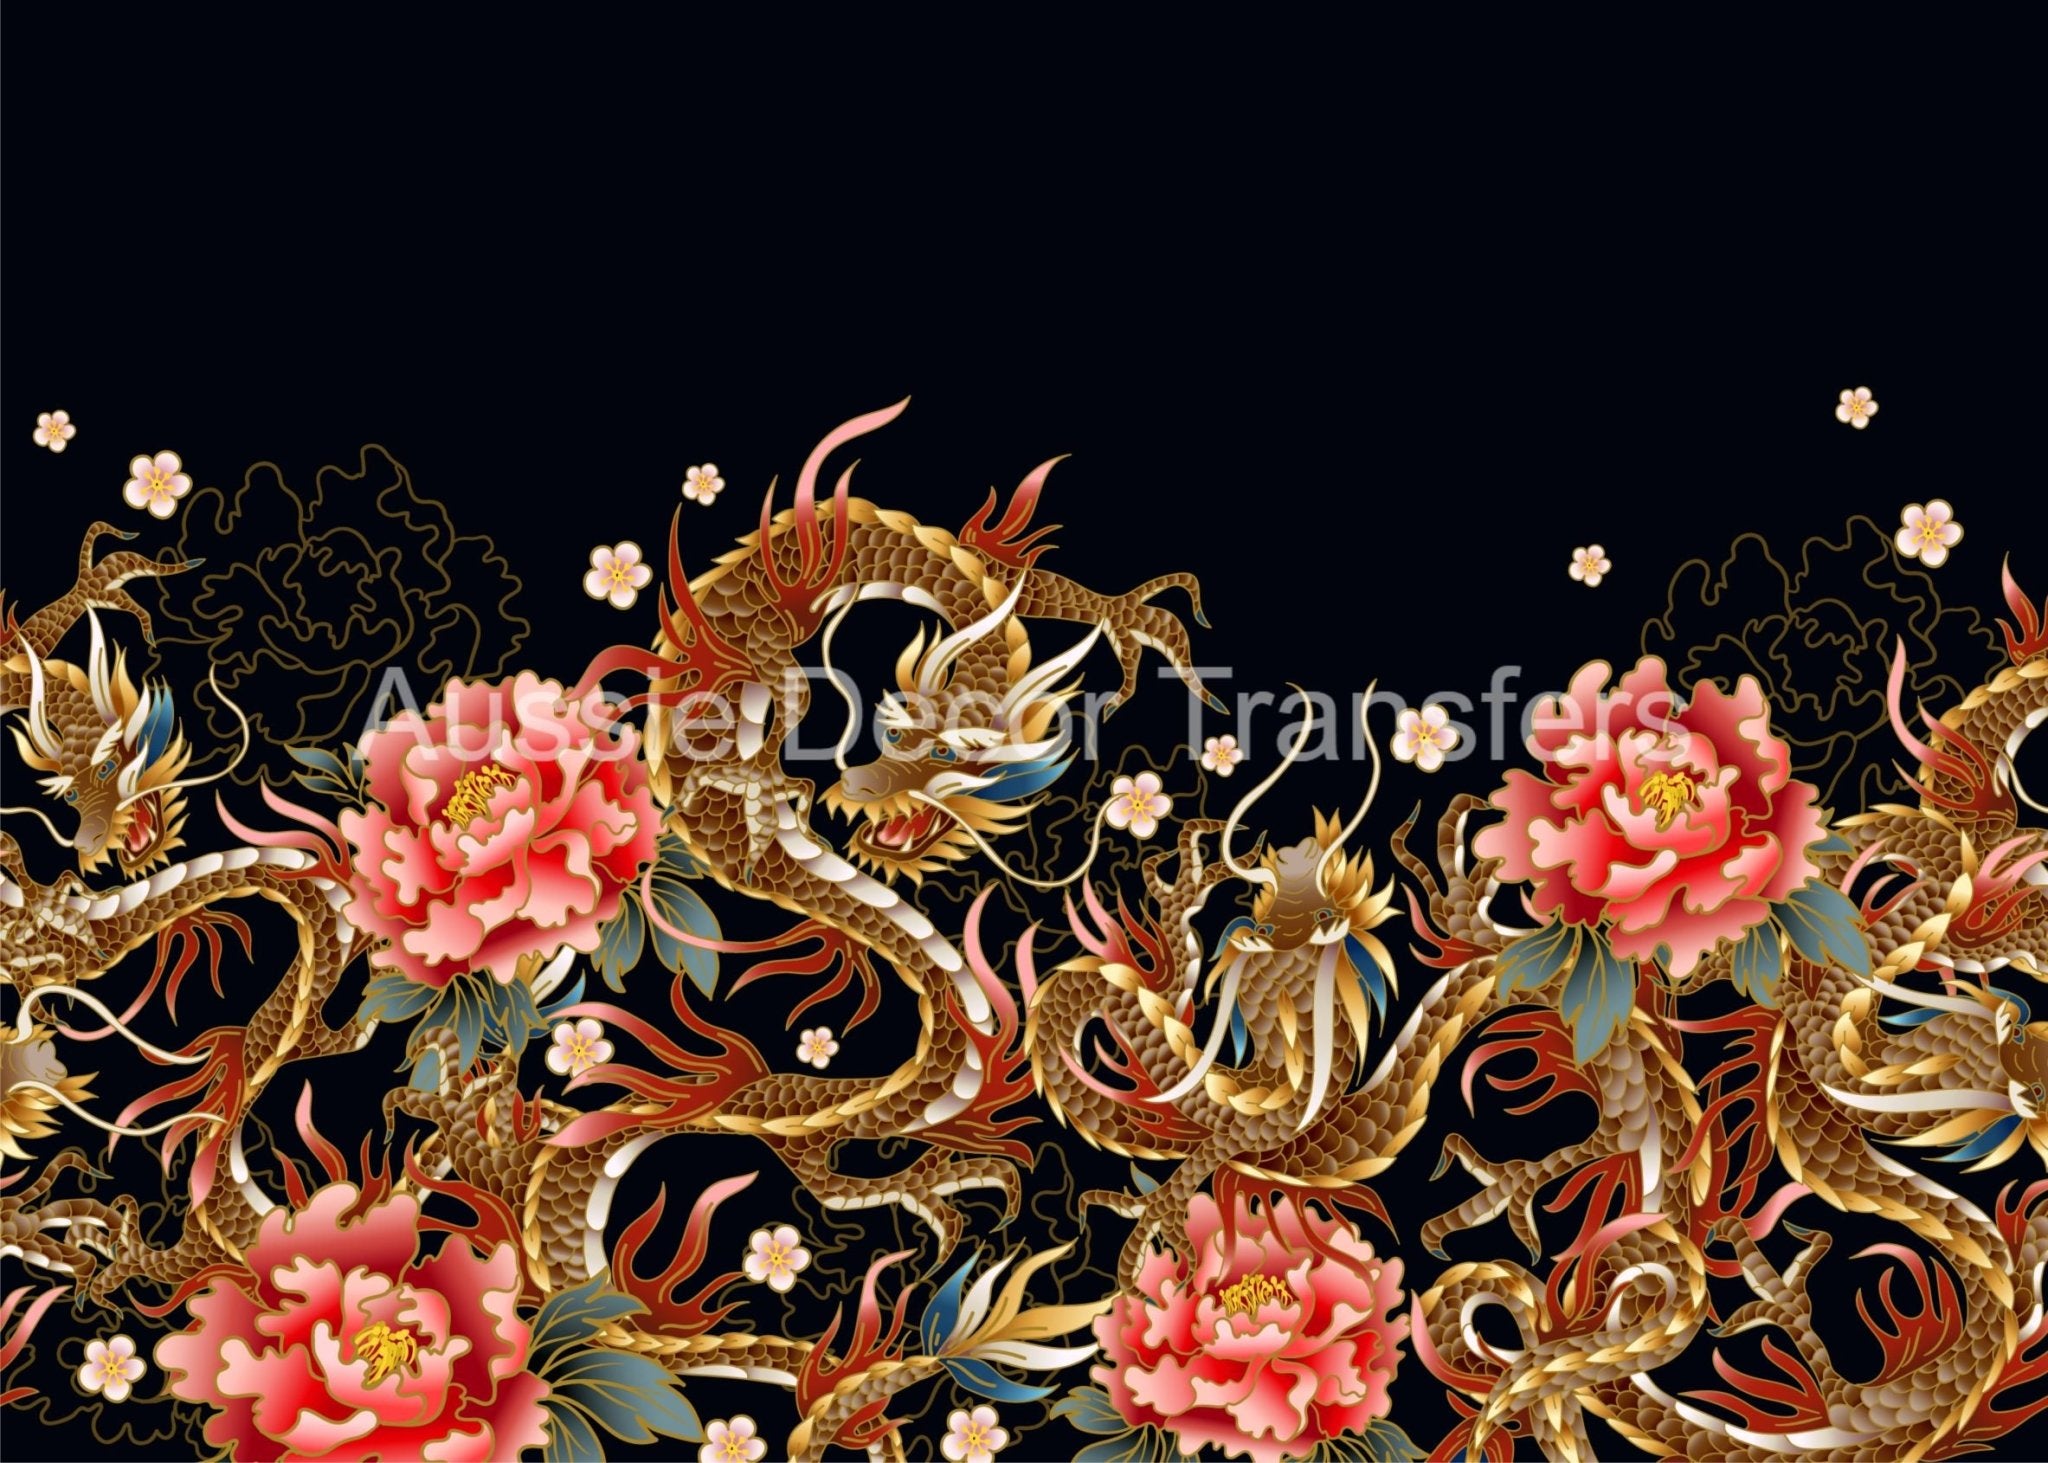 Aussie Decor Transfers Poster Print Chinese Dragon - Not Your Average Poster Print! - AUS ONLY